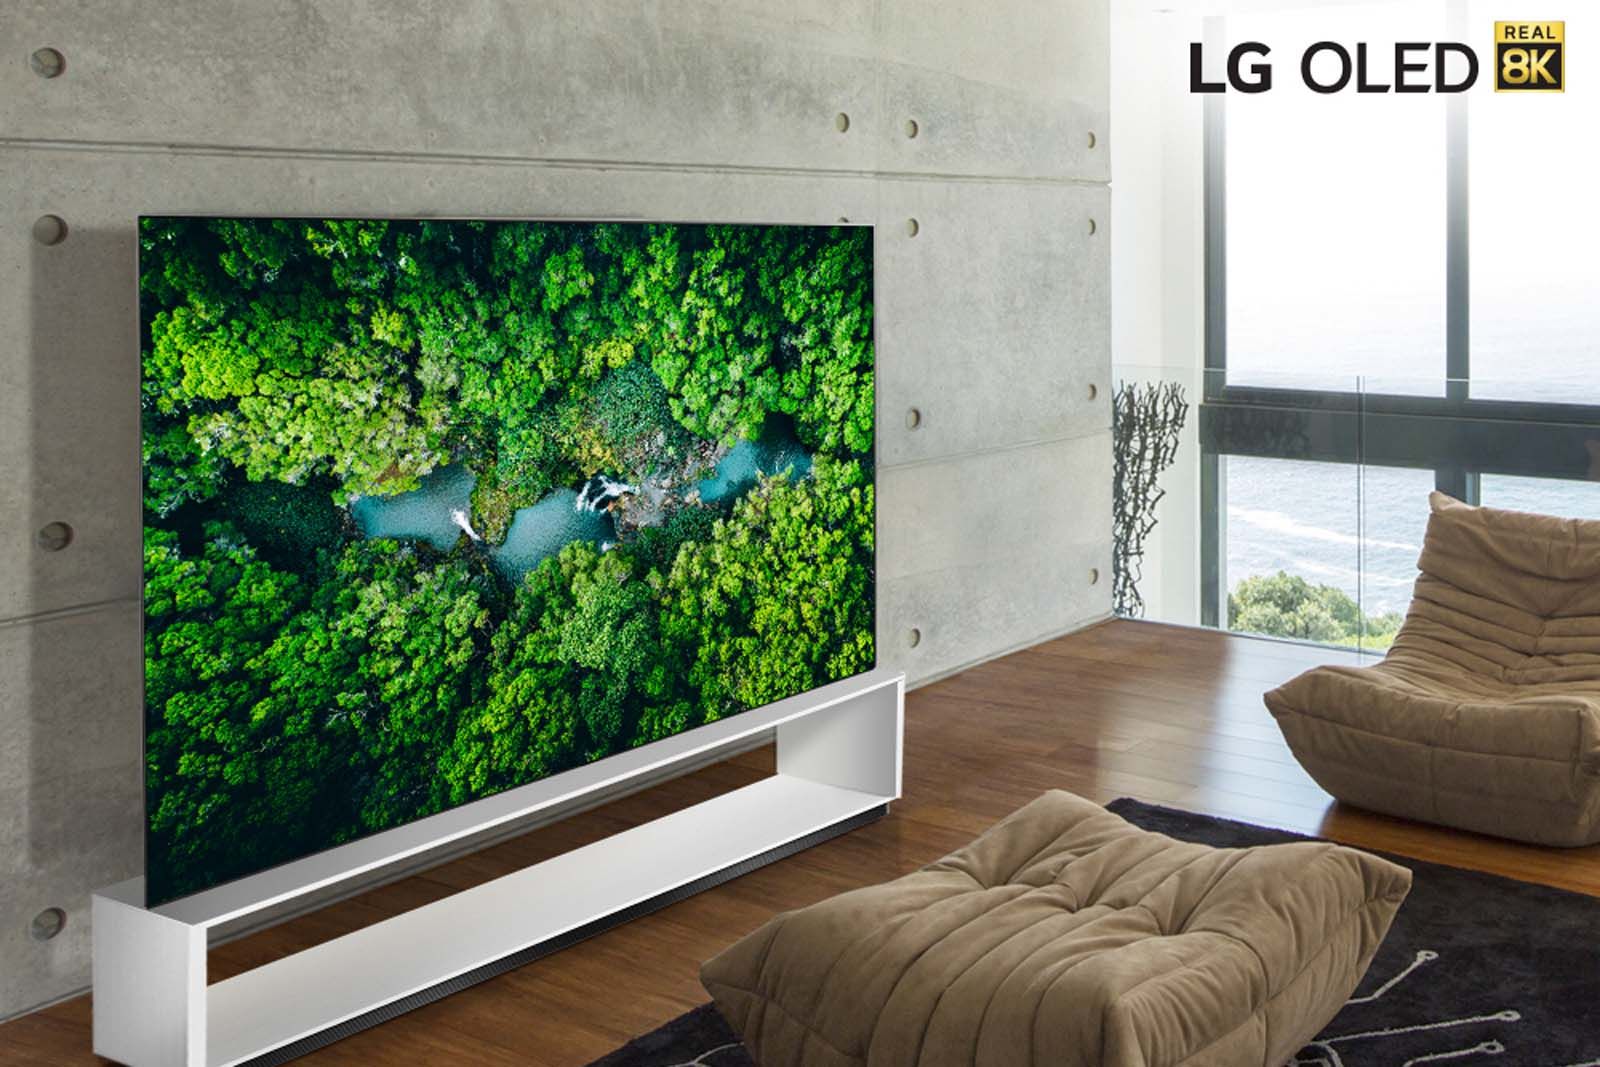 LG adds new models to its 8K TV lineup ahead of CES next week image 1